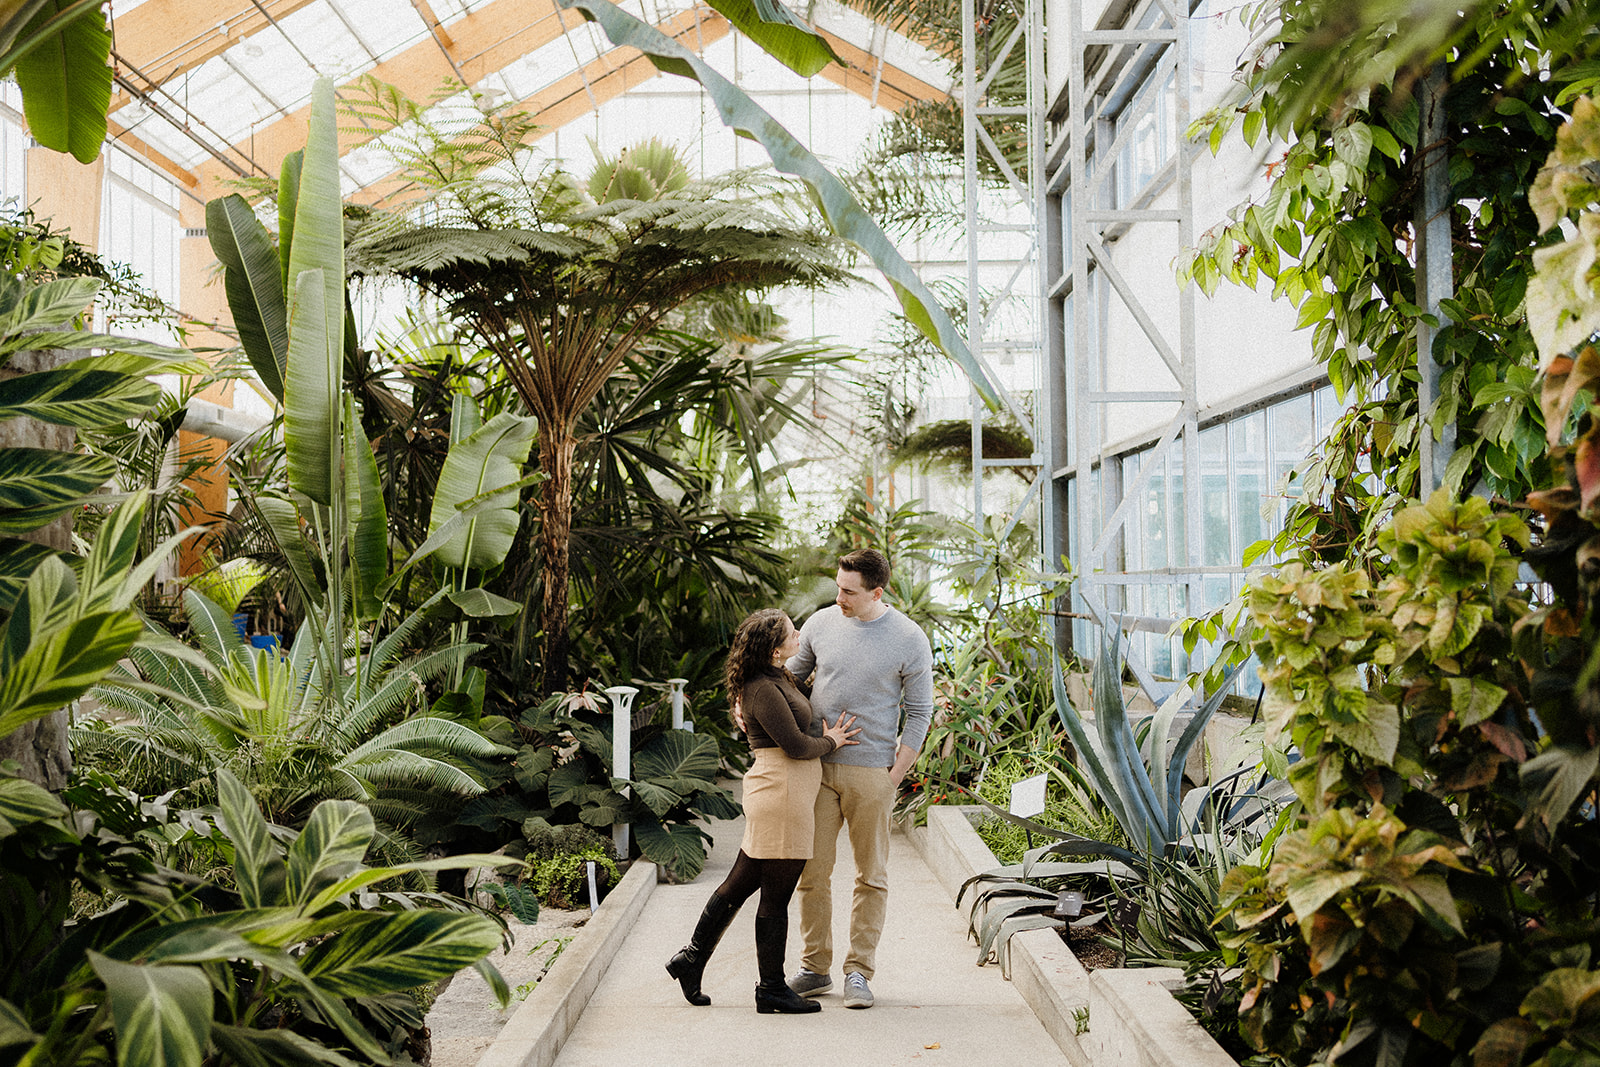 A man and woman standing beside each other in greenhouse.